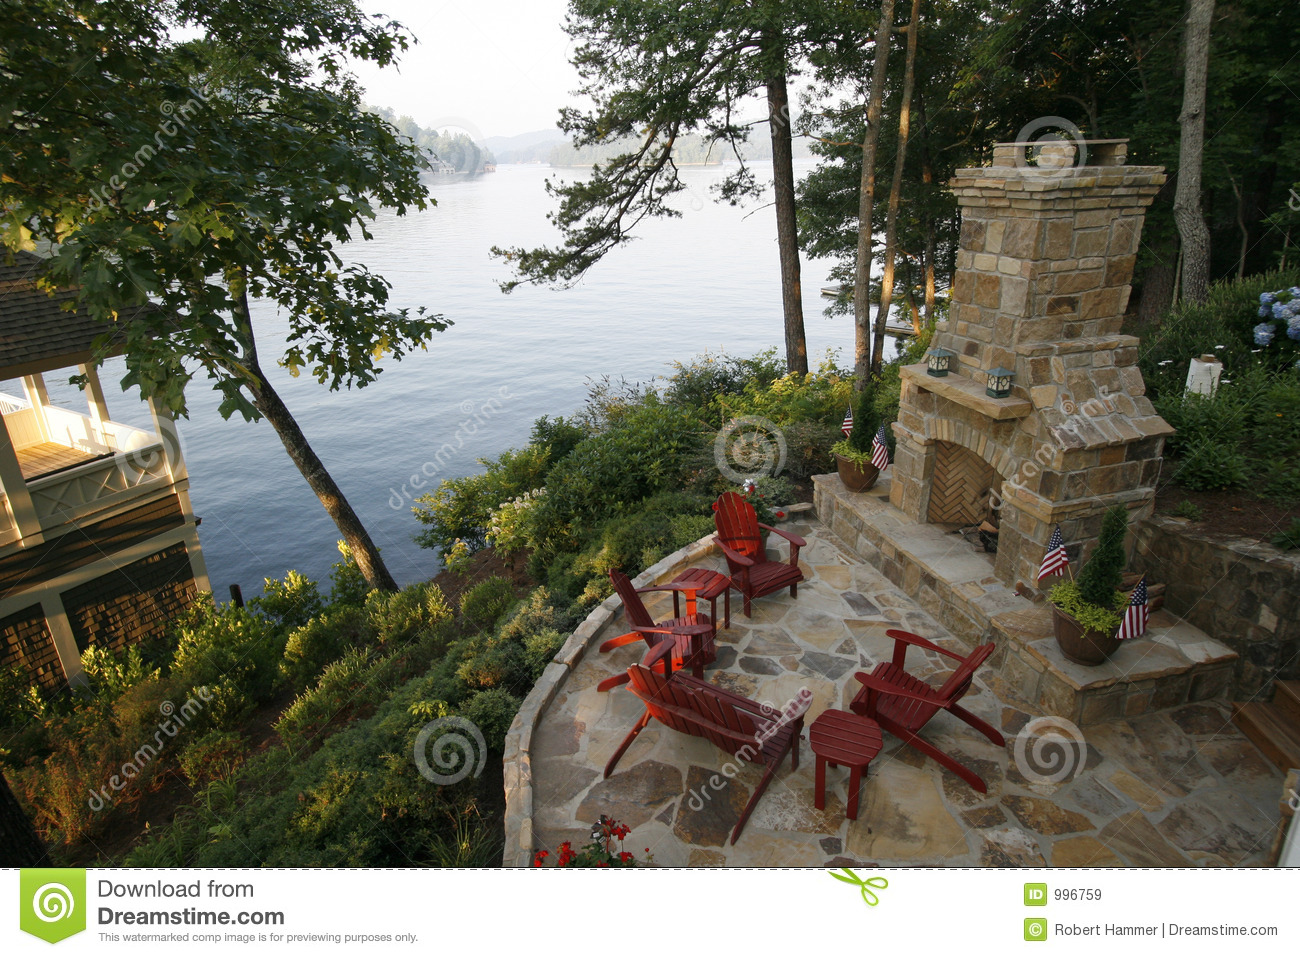 Outdoor Fireplace And Patio Royalty Free Stock Images   Image  996759